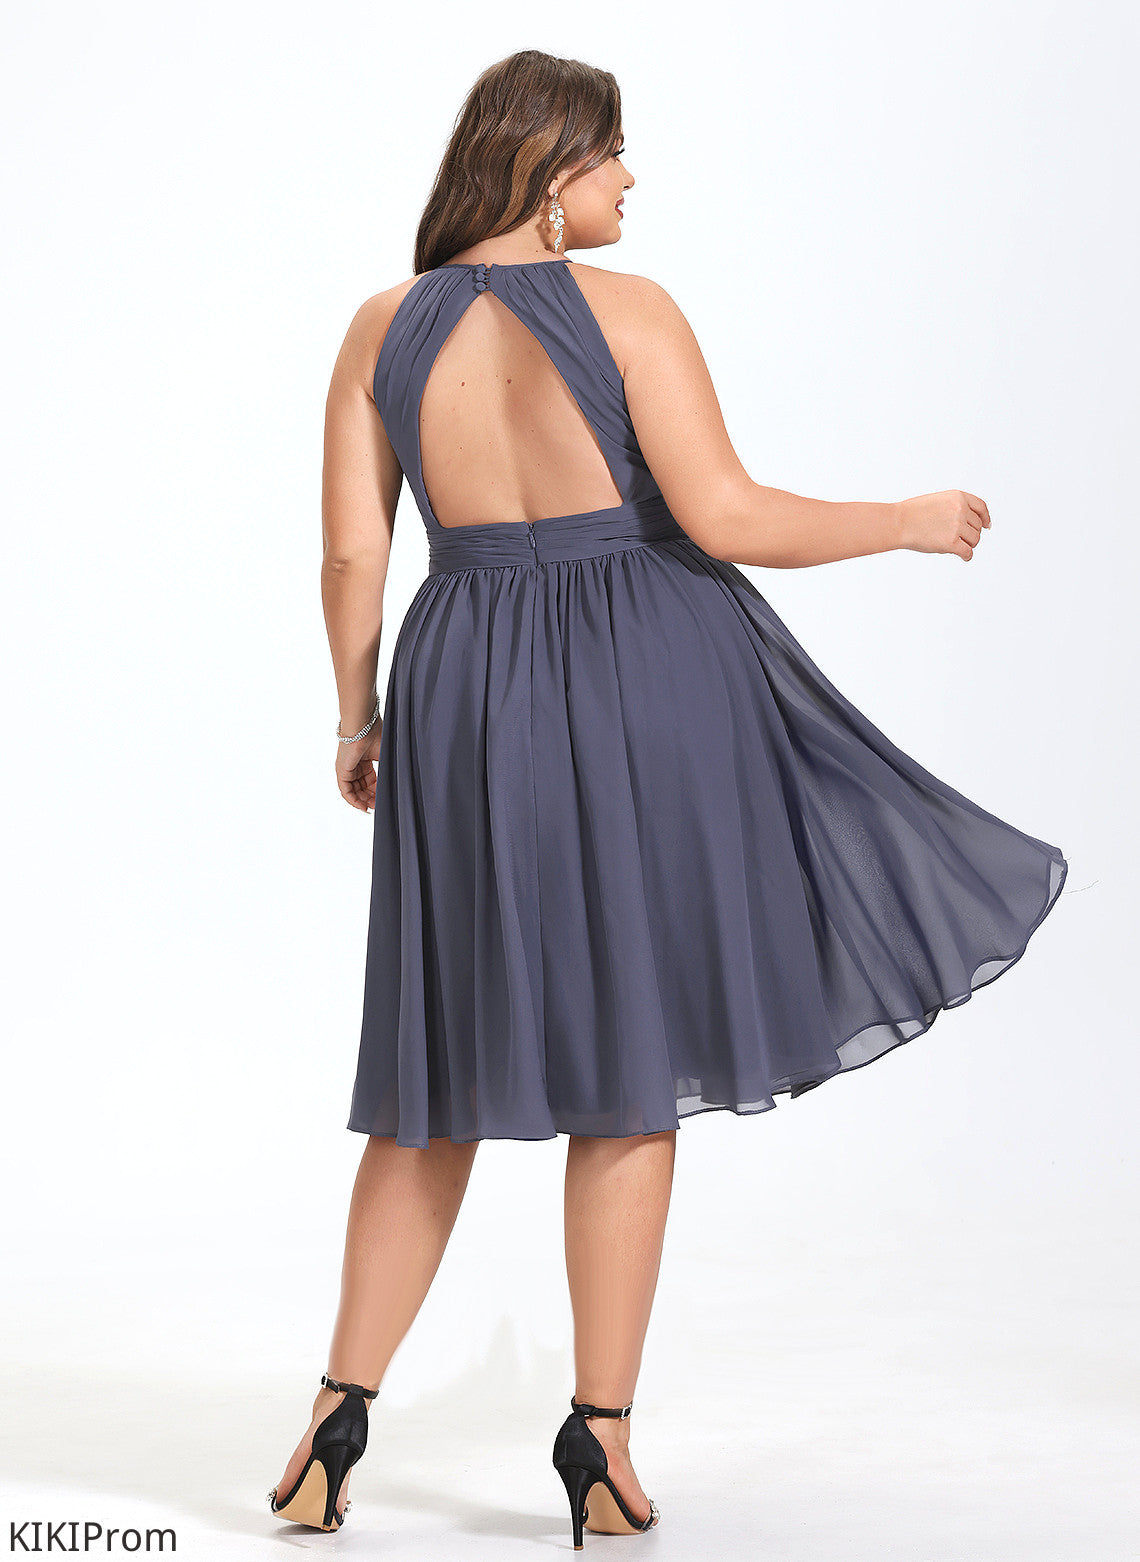 Ruffle Neck Cocktail Scoop Chiffon With Cocktail Dresses A-Line Knee-Length Danielle Dress